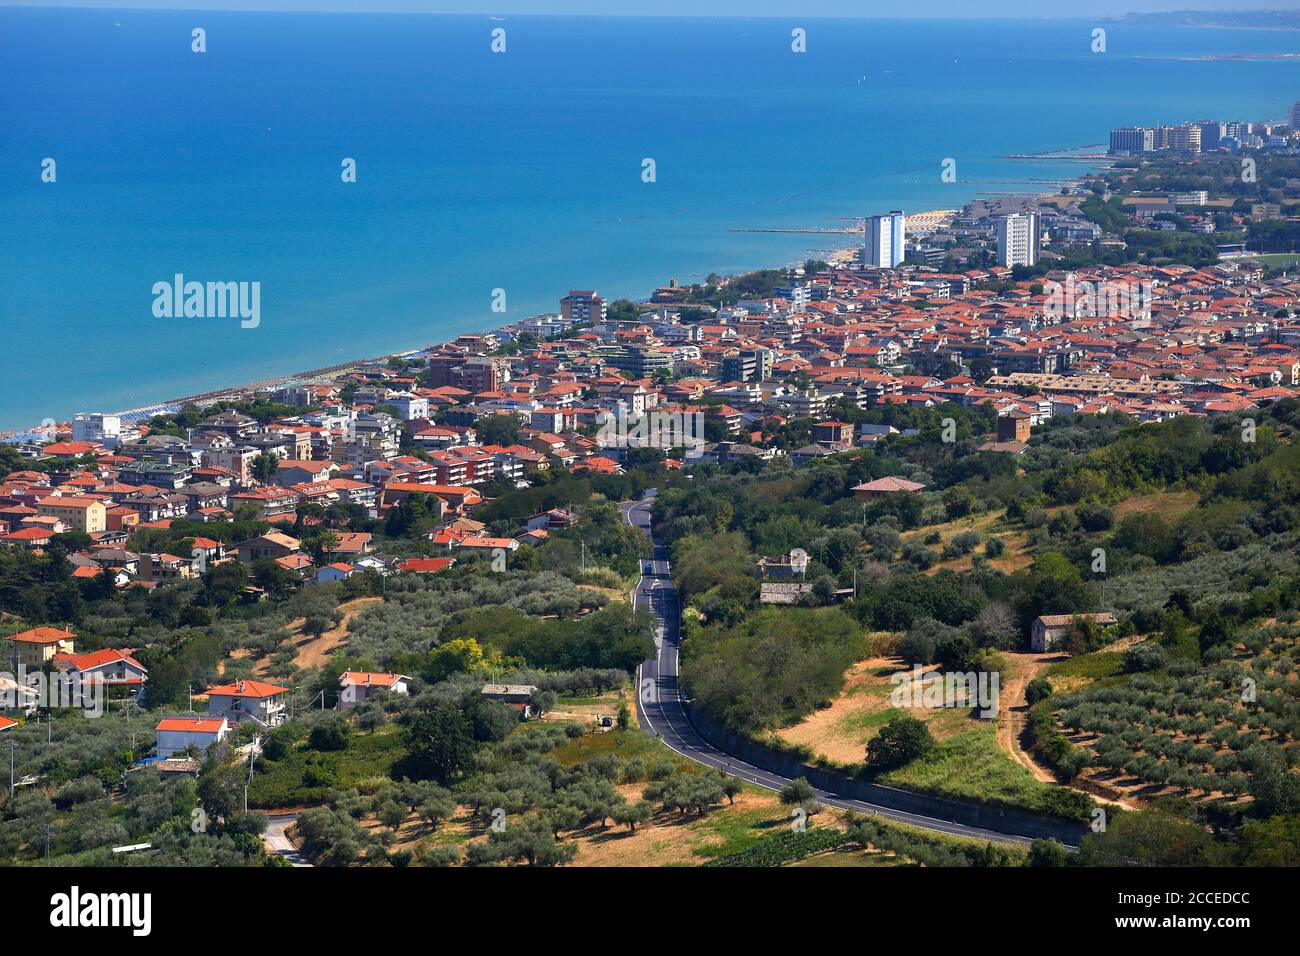 Silvi Marina and the Adriatic Sea seen from Silvi Paese, Abruzzo, Italy. The view is looking south east down the coast towards Pescara. Stock Photo